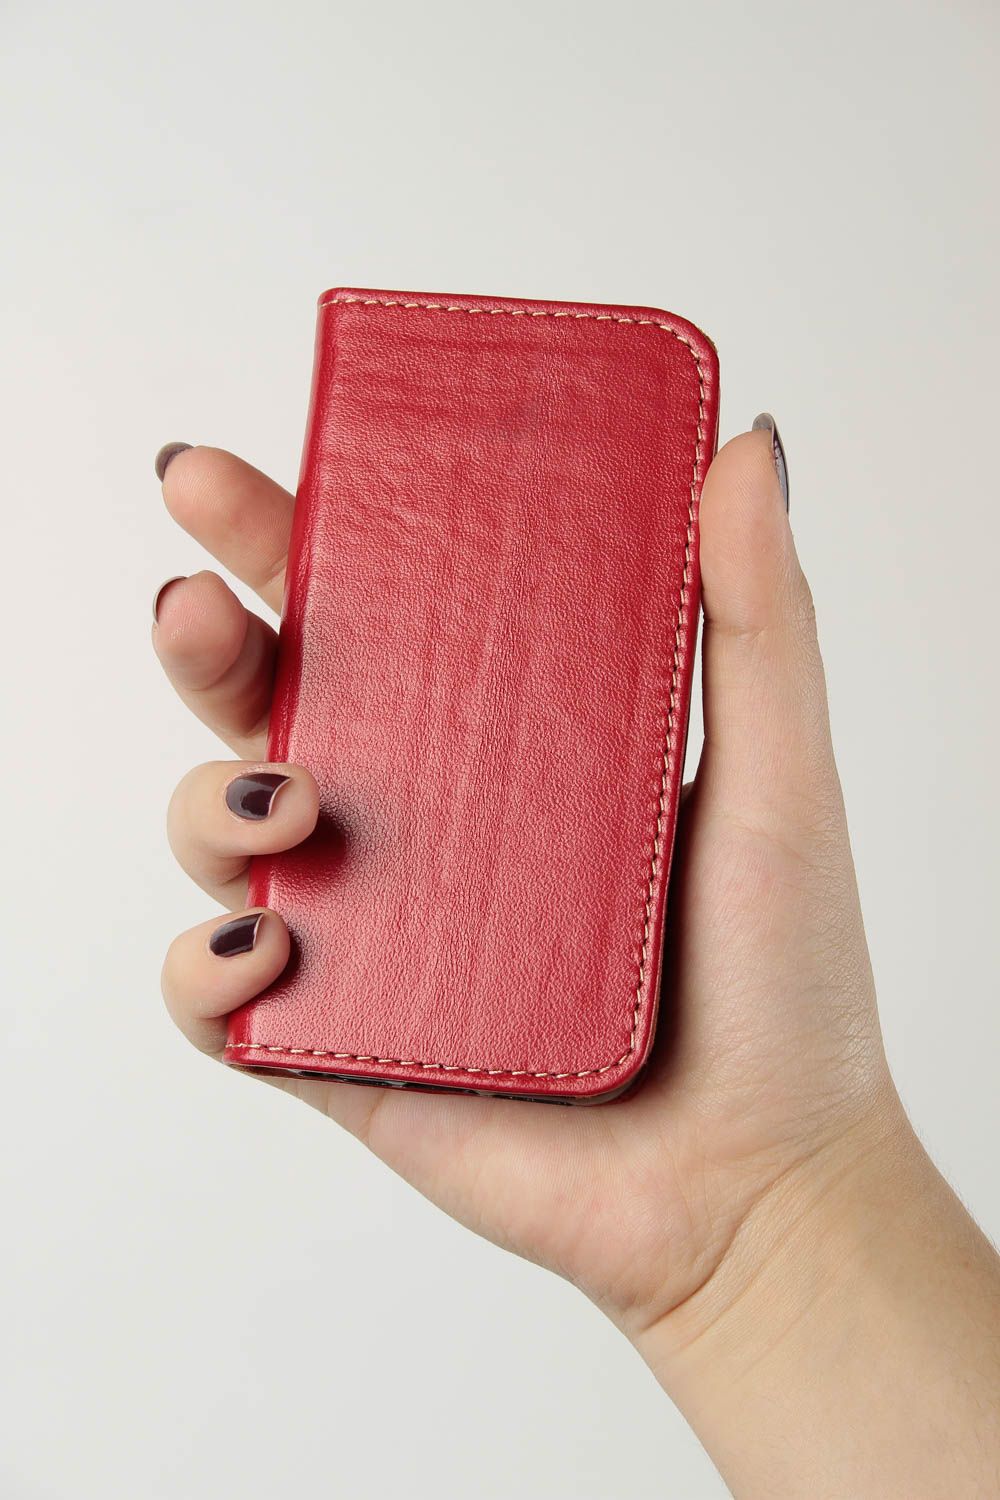 Red handmade leather phone case fashion accessories for girls small gifts photo 1